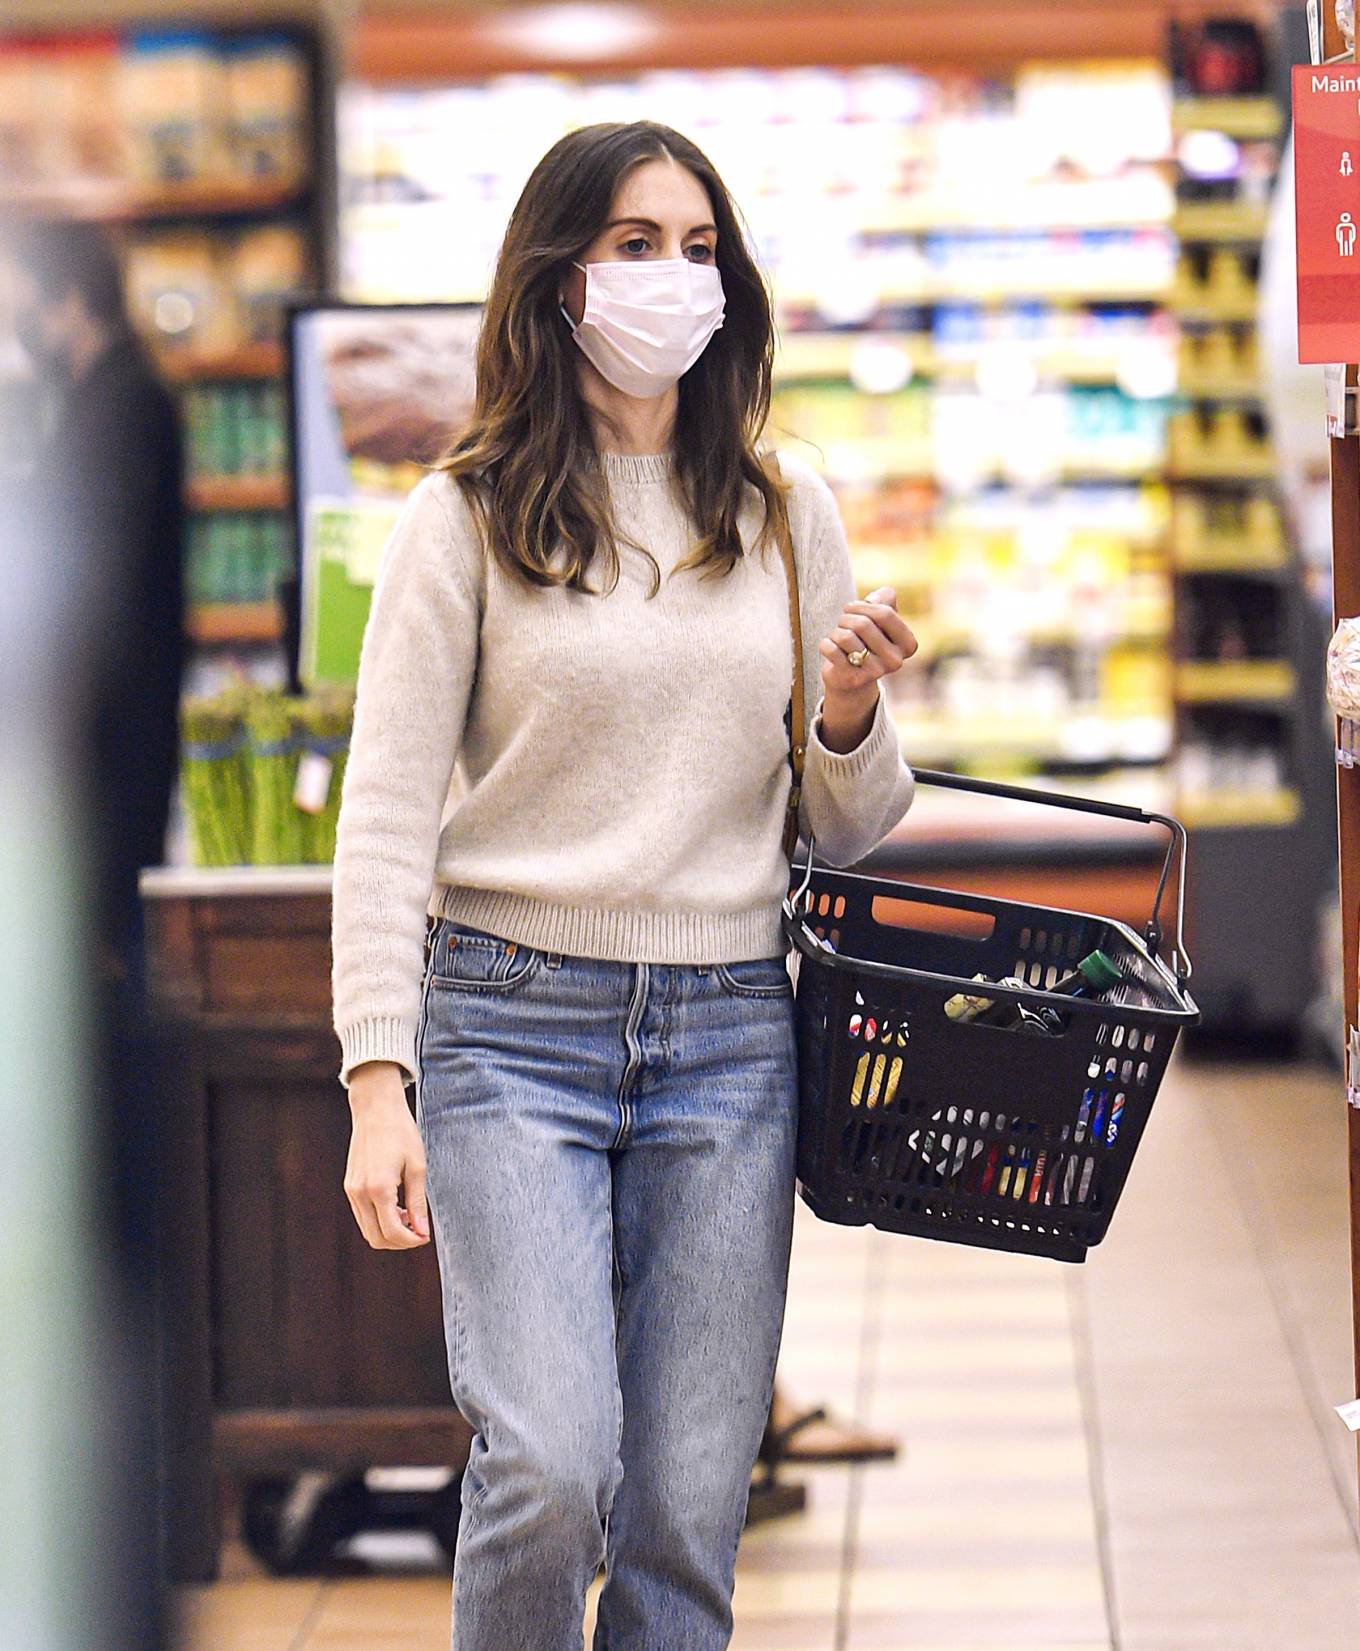 Alison Brie 2021 : Alison Brie – Shopping candids at Gelsons Supermarket in Los Angeles-12